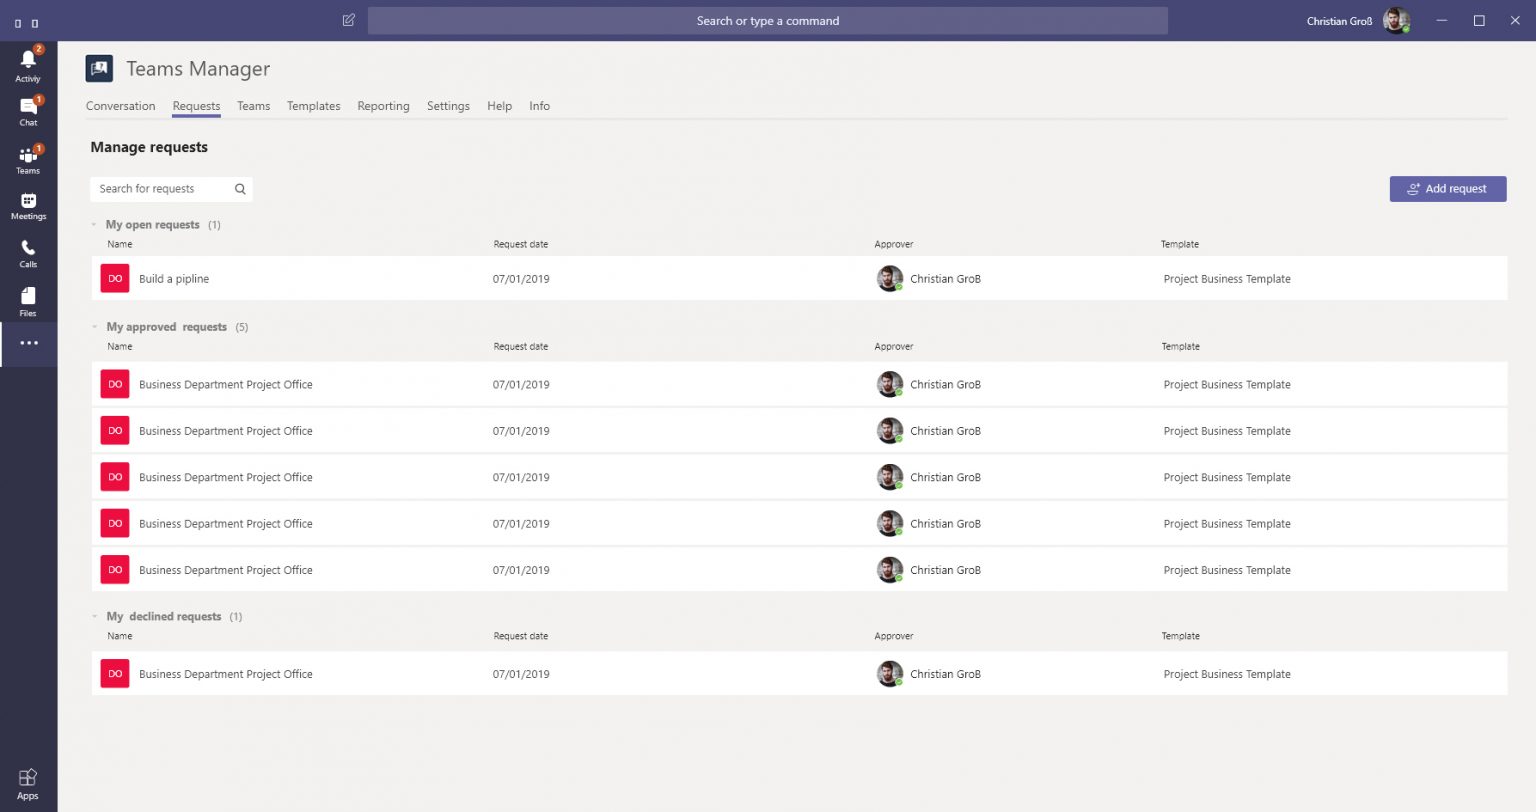 Manage request in Teams Manager.